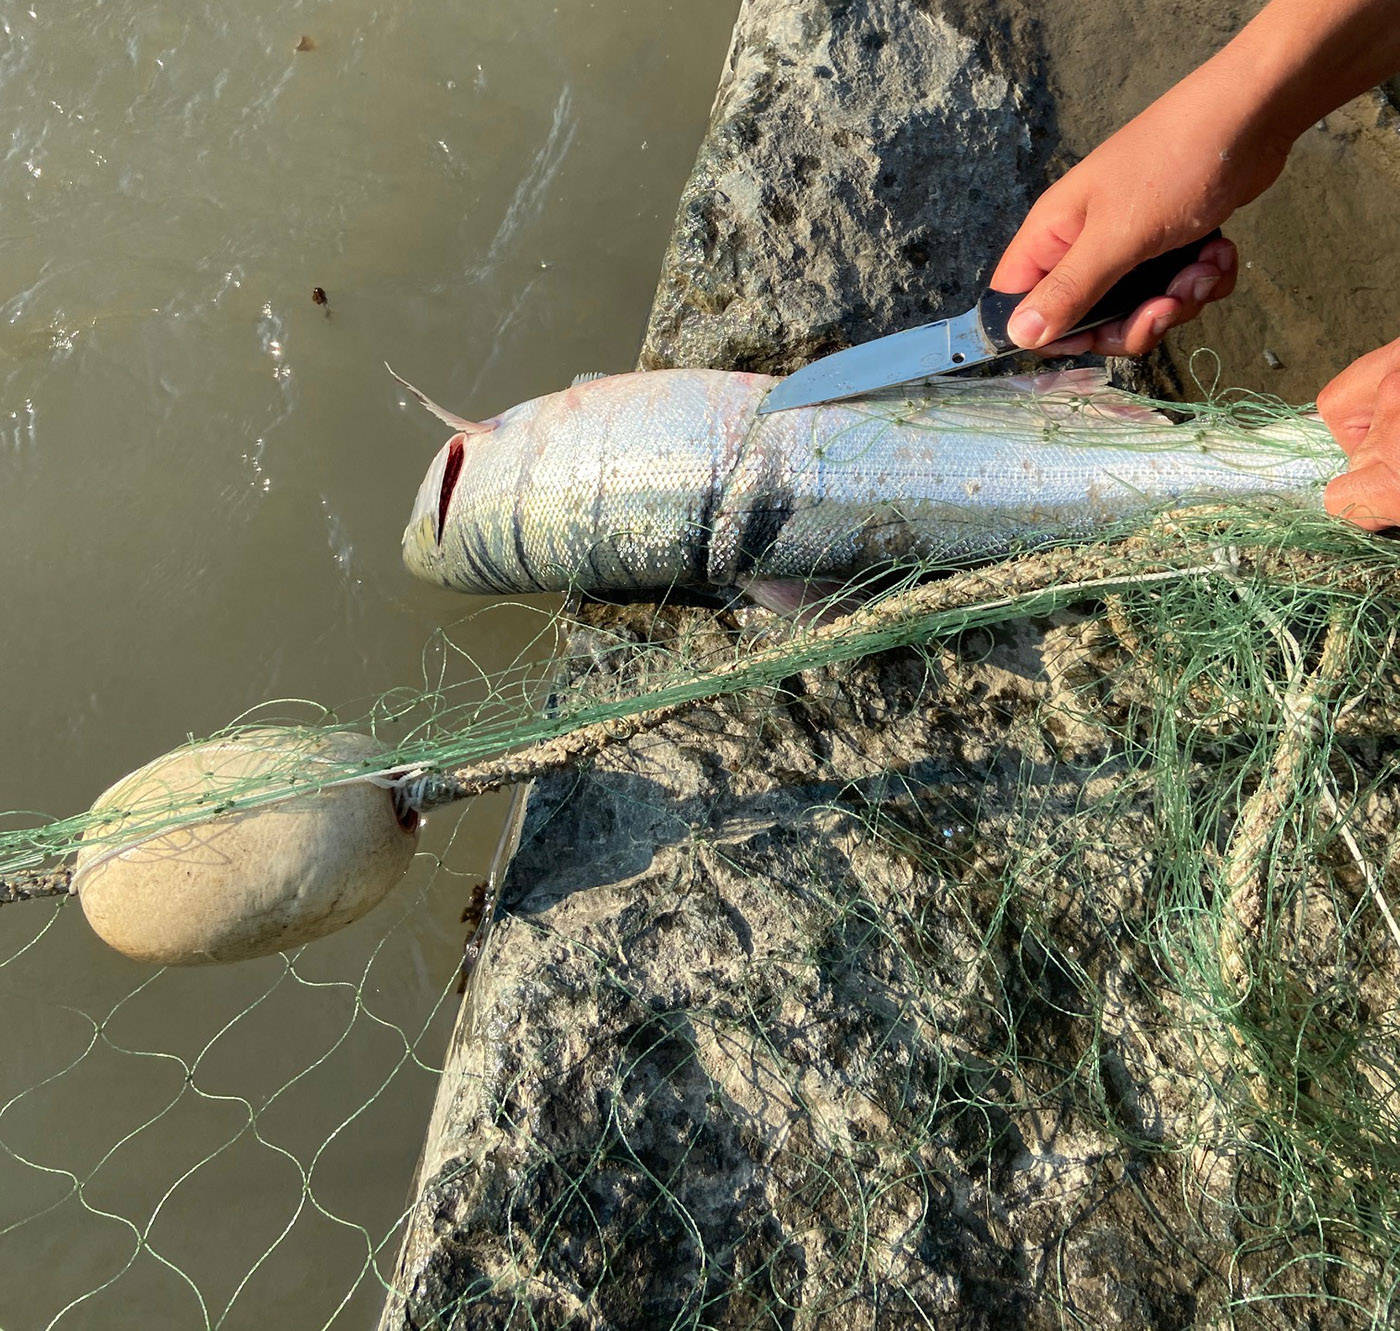 Between 200 and 250 illegal fishing nets have been seized on the Fraser River by DFO so far this year. (DFO)